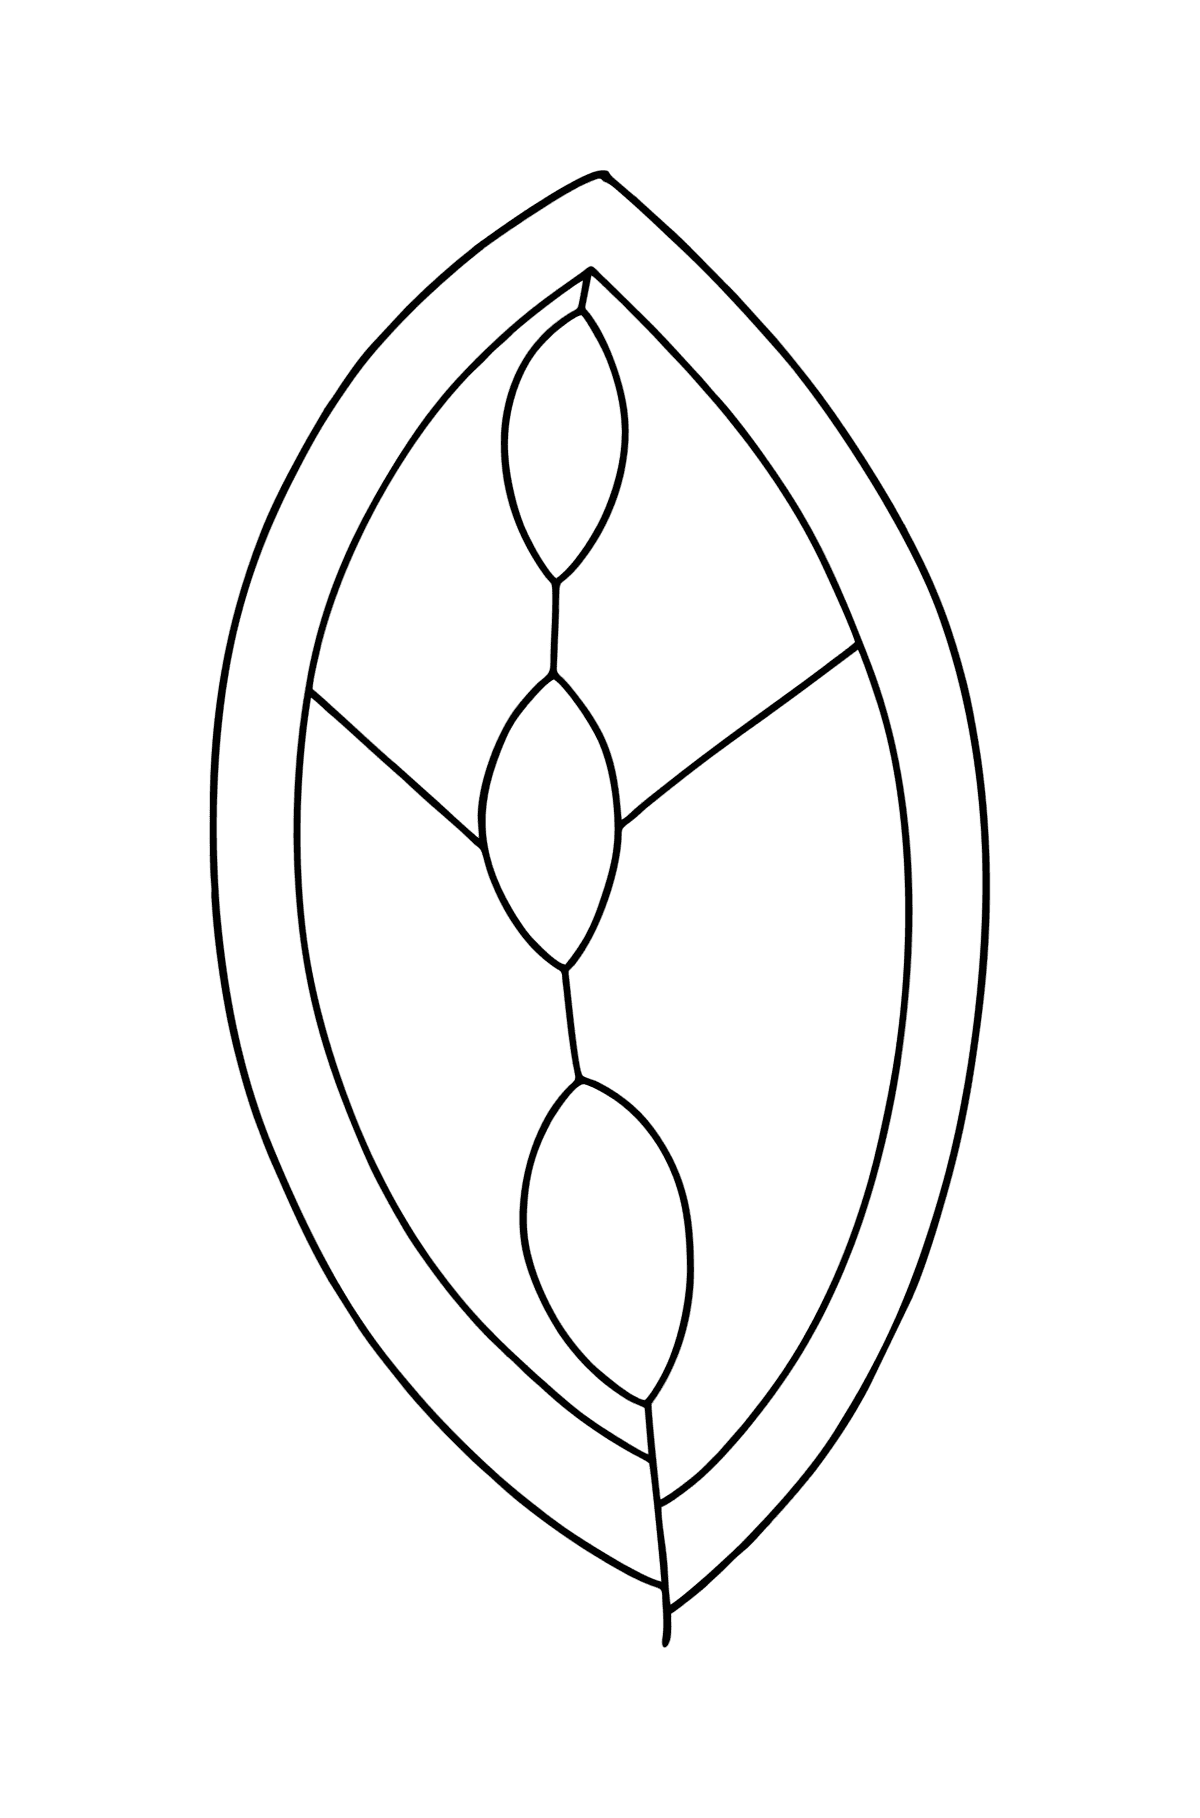 Simple Zen Leaf coloring page - Coloring Pages for Kids